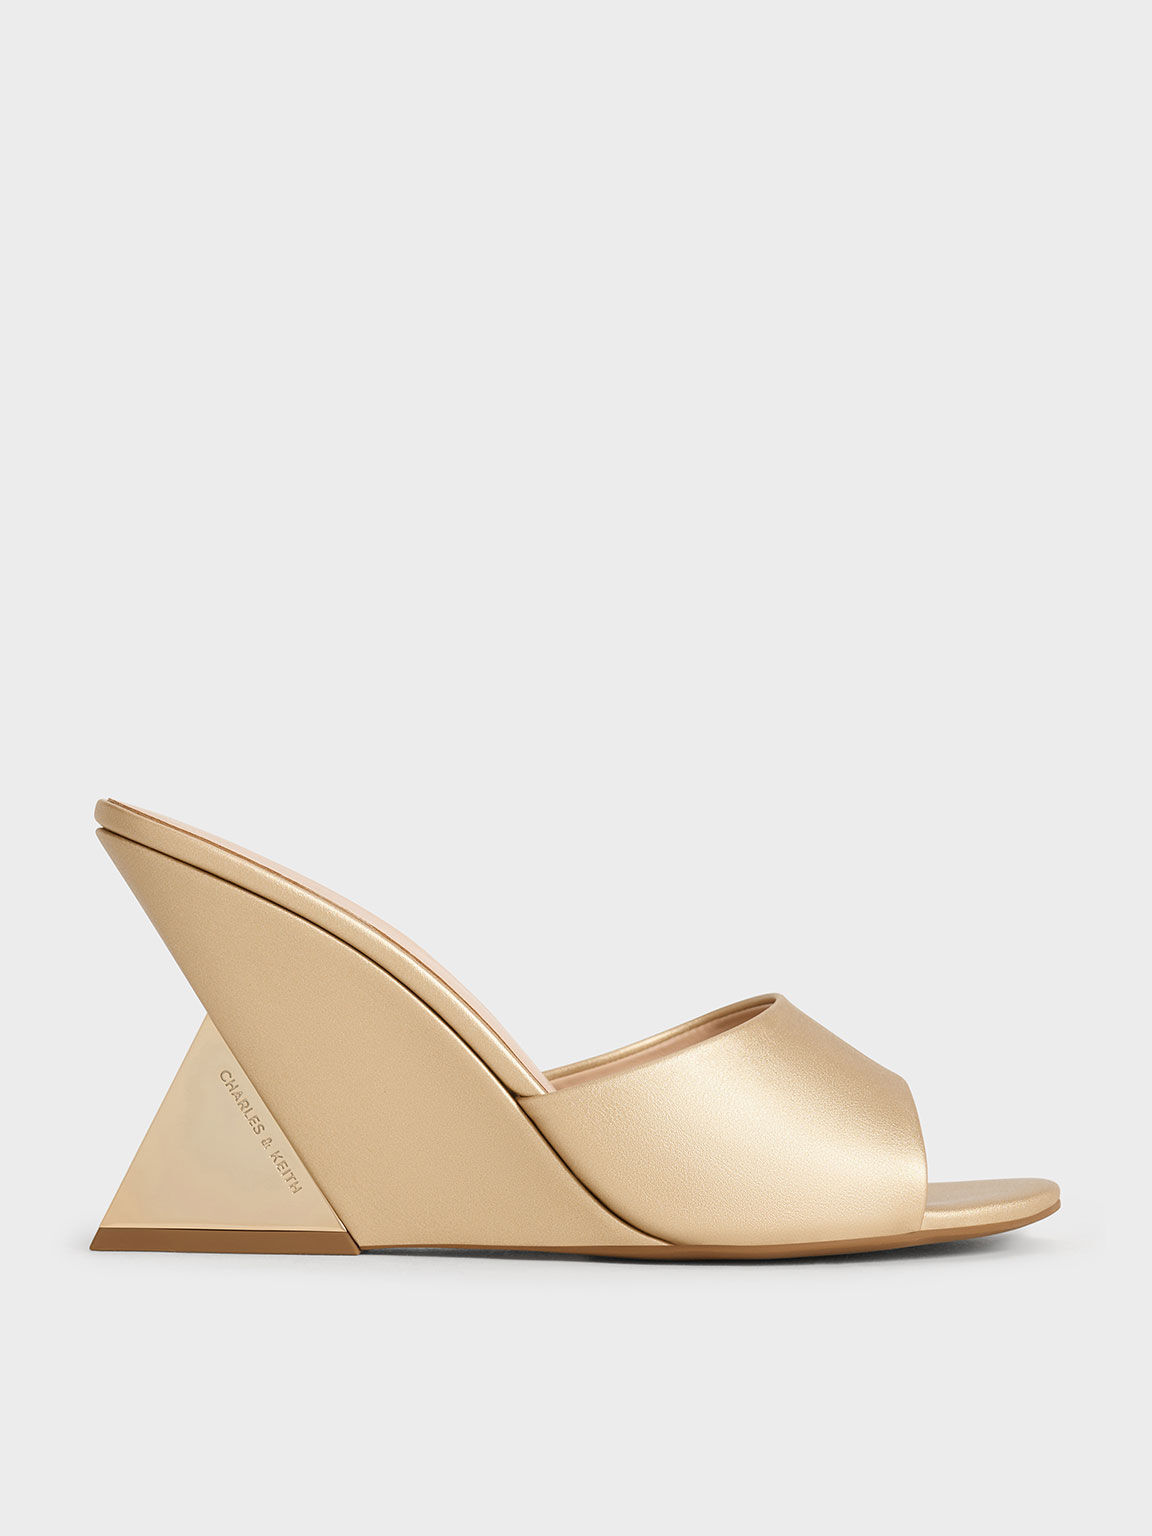 Triangle-Heel Wedge Mules, Gold, hi-res